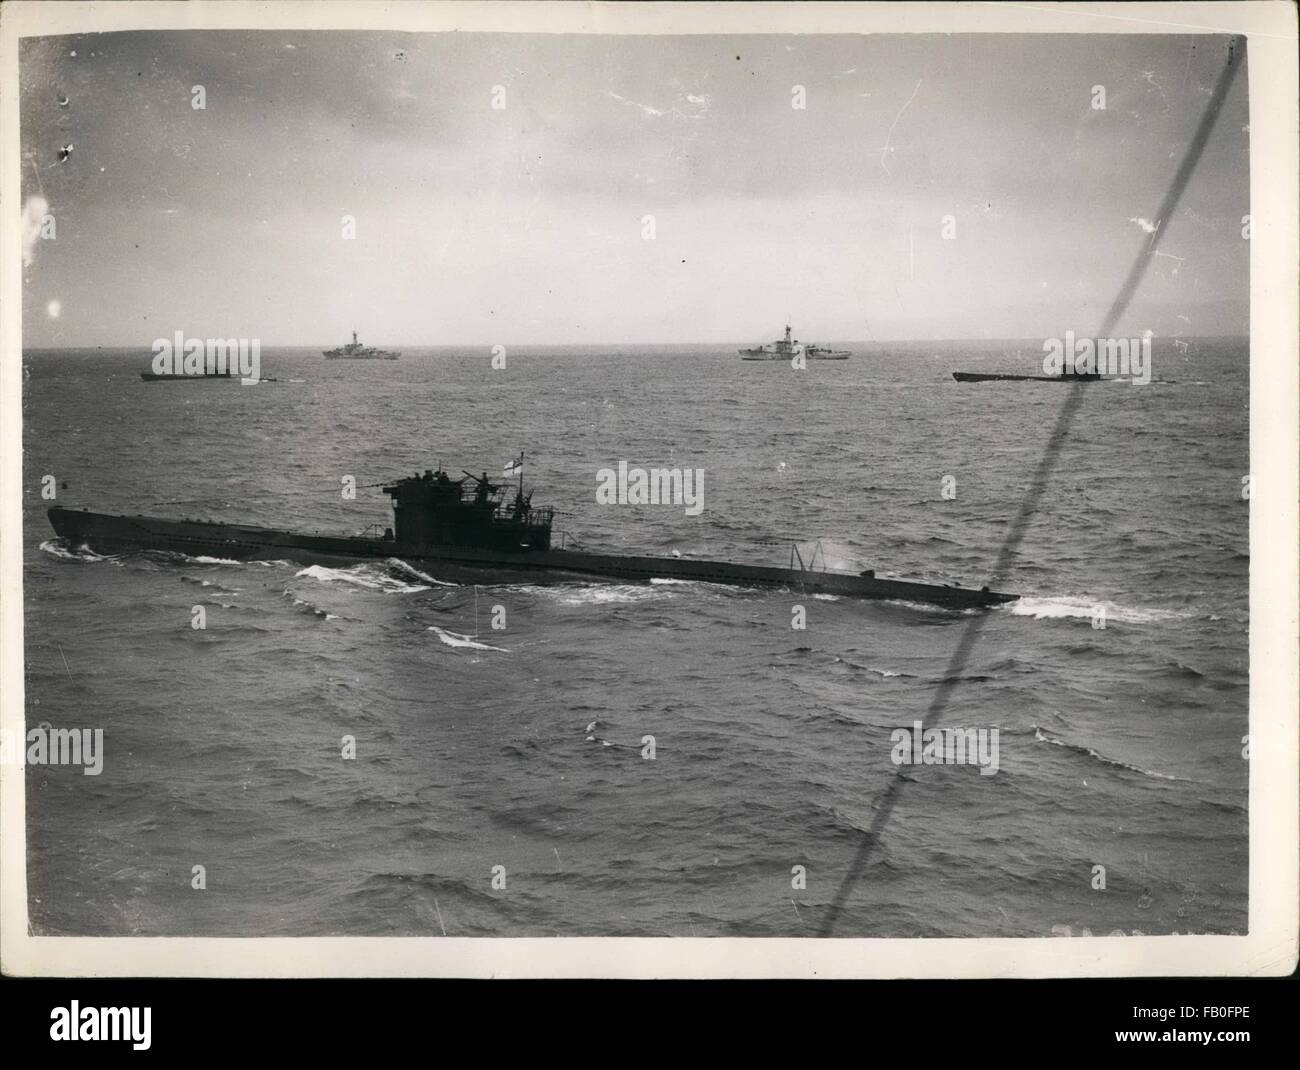 1956 - More U-Boats Arrive At Londonderry. German U-Boats escorted by British warships have arrived at Londonderry. Photo show: Three of the U-Boat with escort on their way to Londonderry. © Keystone Pictures USA/ZUMAPRESS.com/Alamy Live News Stock Photo